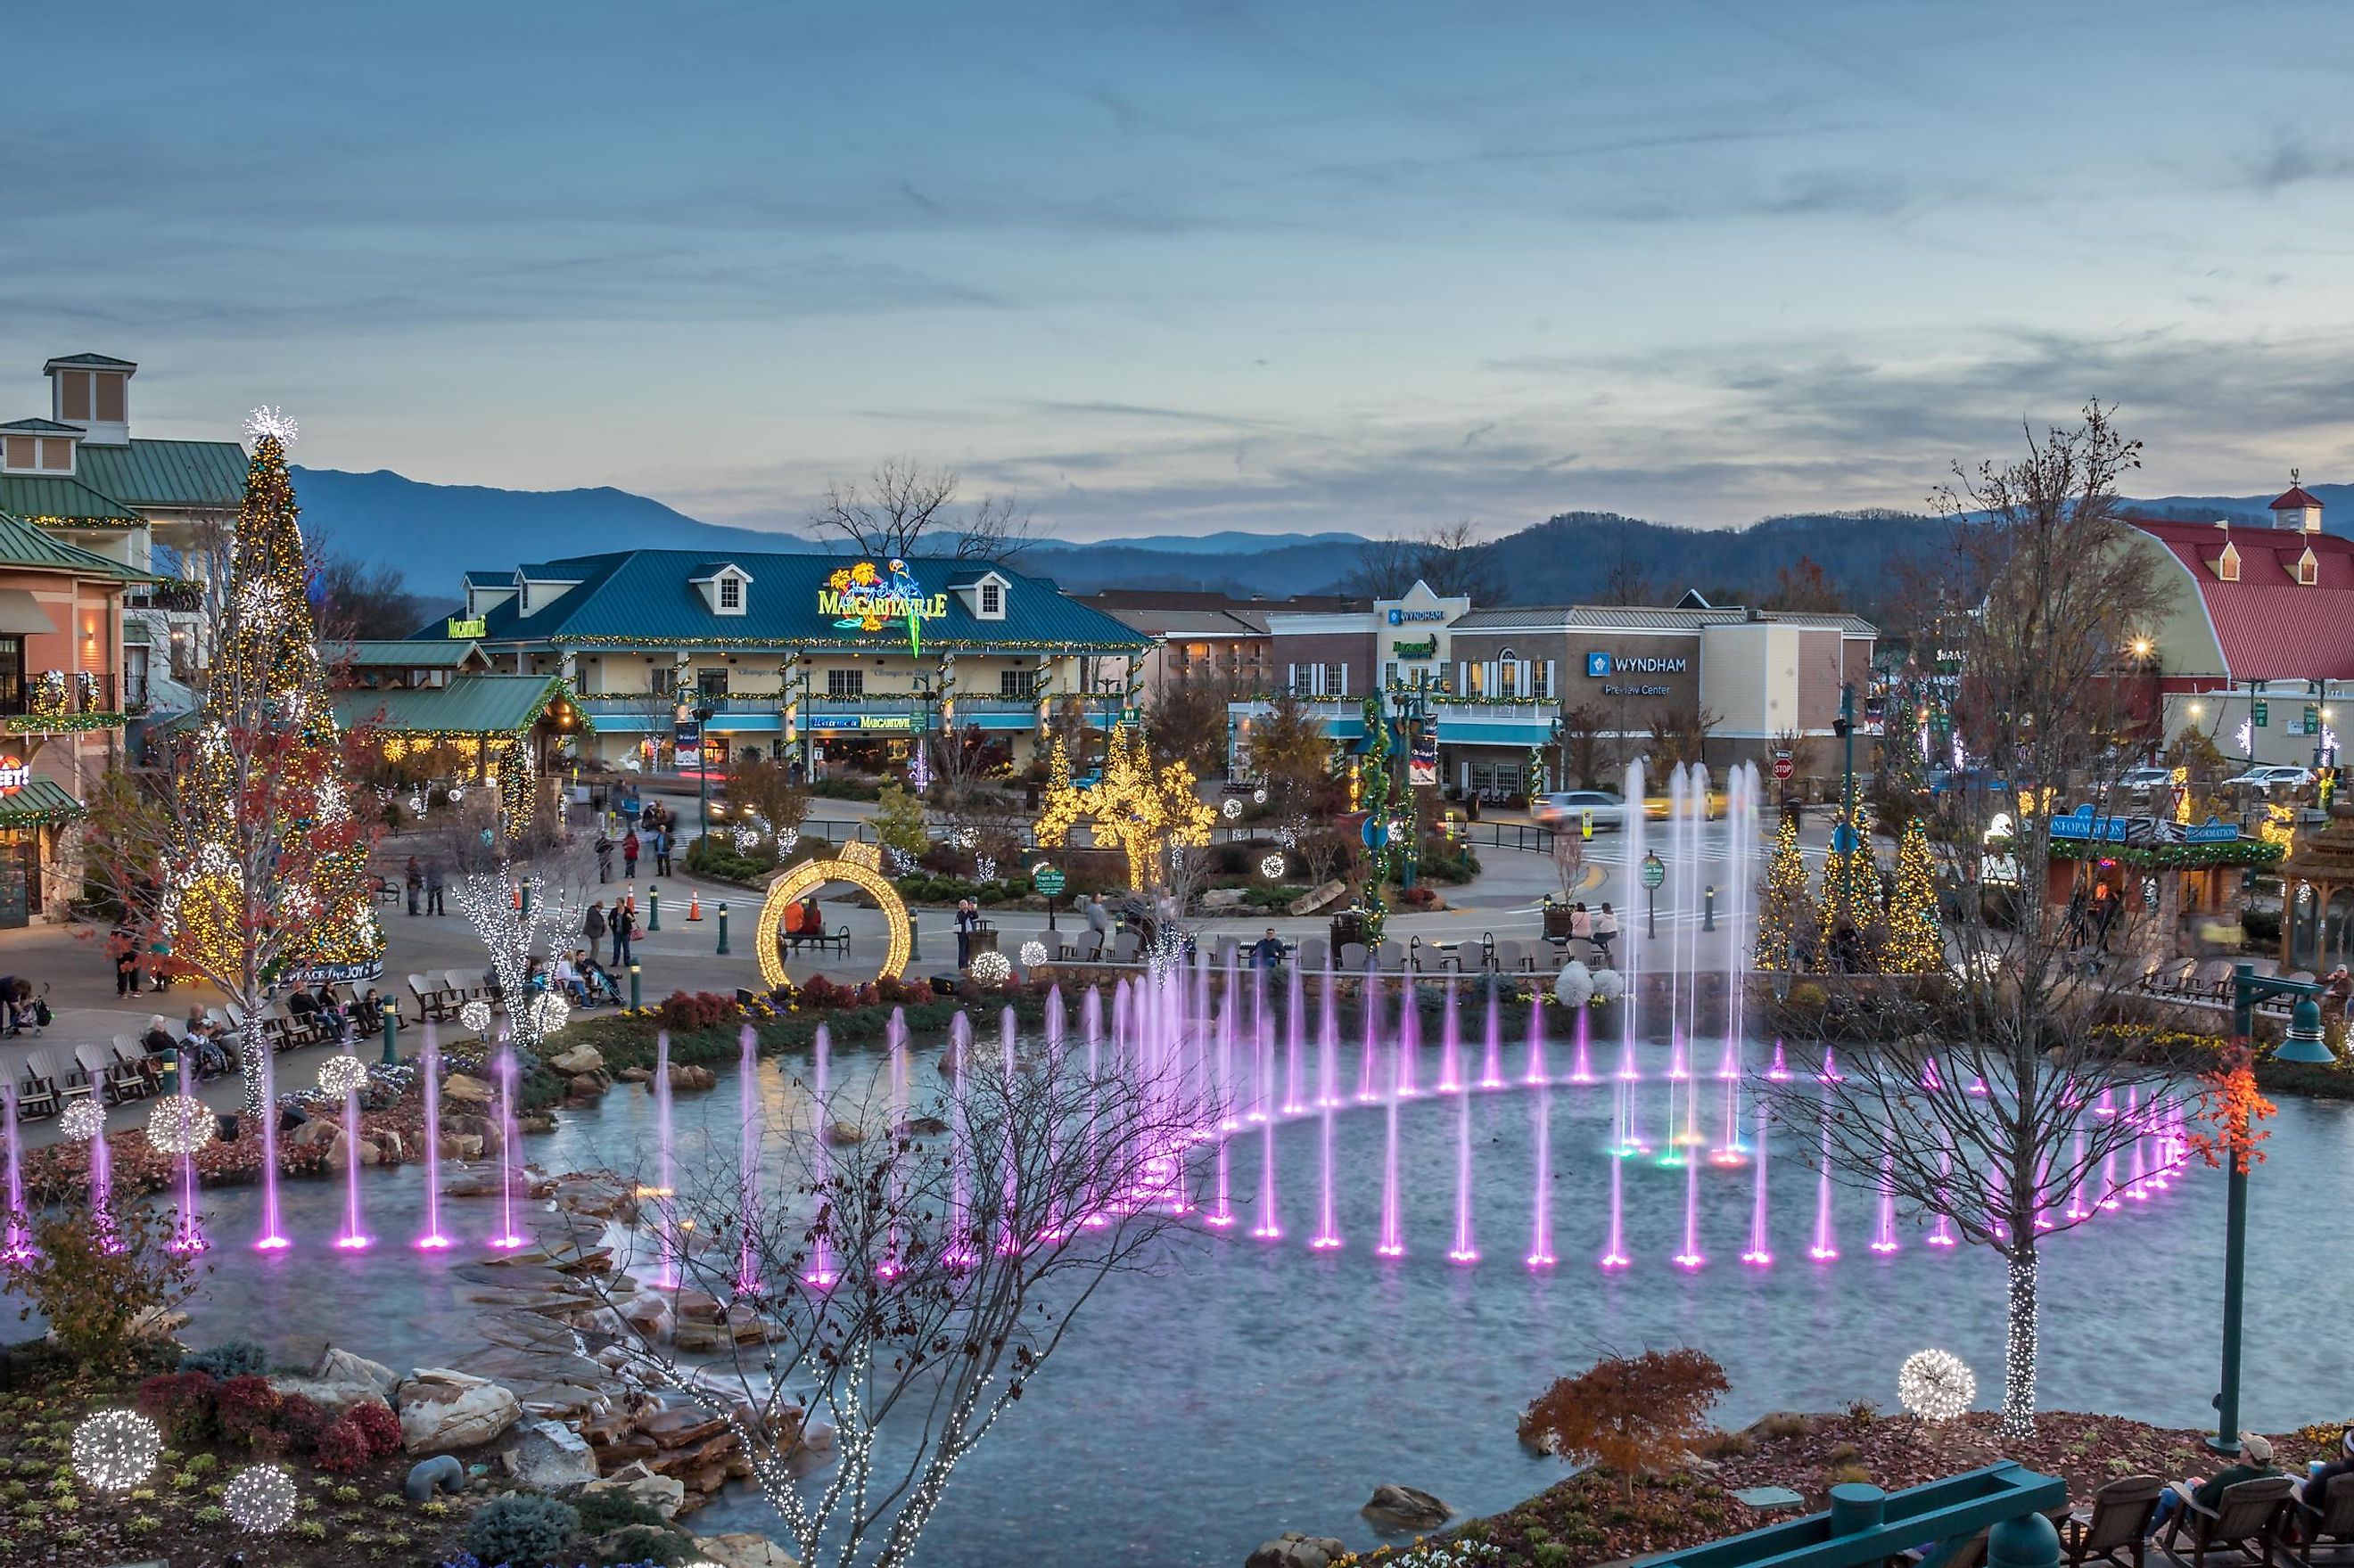 Colorful display from The Island show fountain in Pigeon Forge, Tennessee. Editorial credit: Scott Heaney / Shutterstock.com